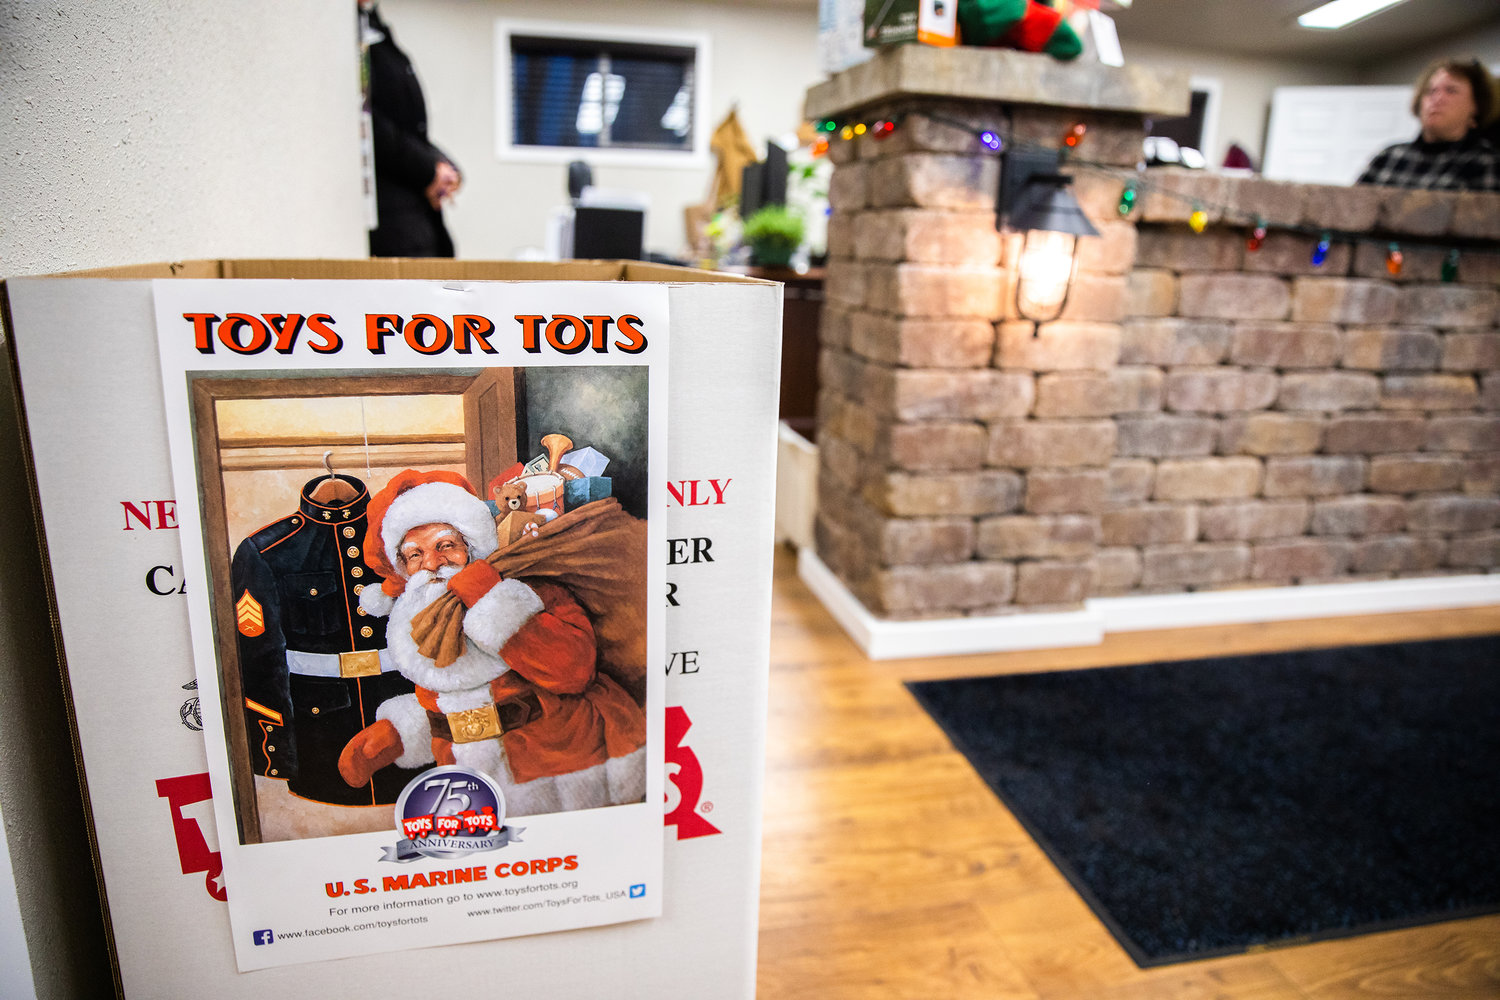 A Toys For Tots collection bin sits on display during a Business After Hours event at the Centralia-Chehalis Chamber of Commerce building.